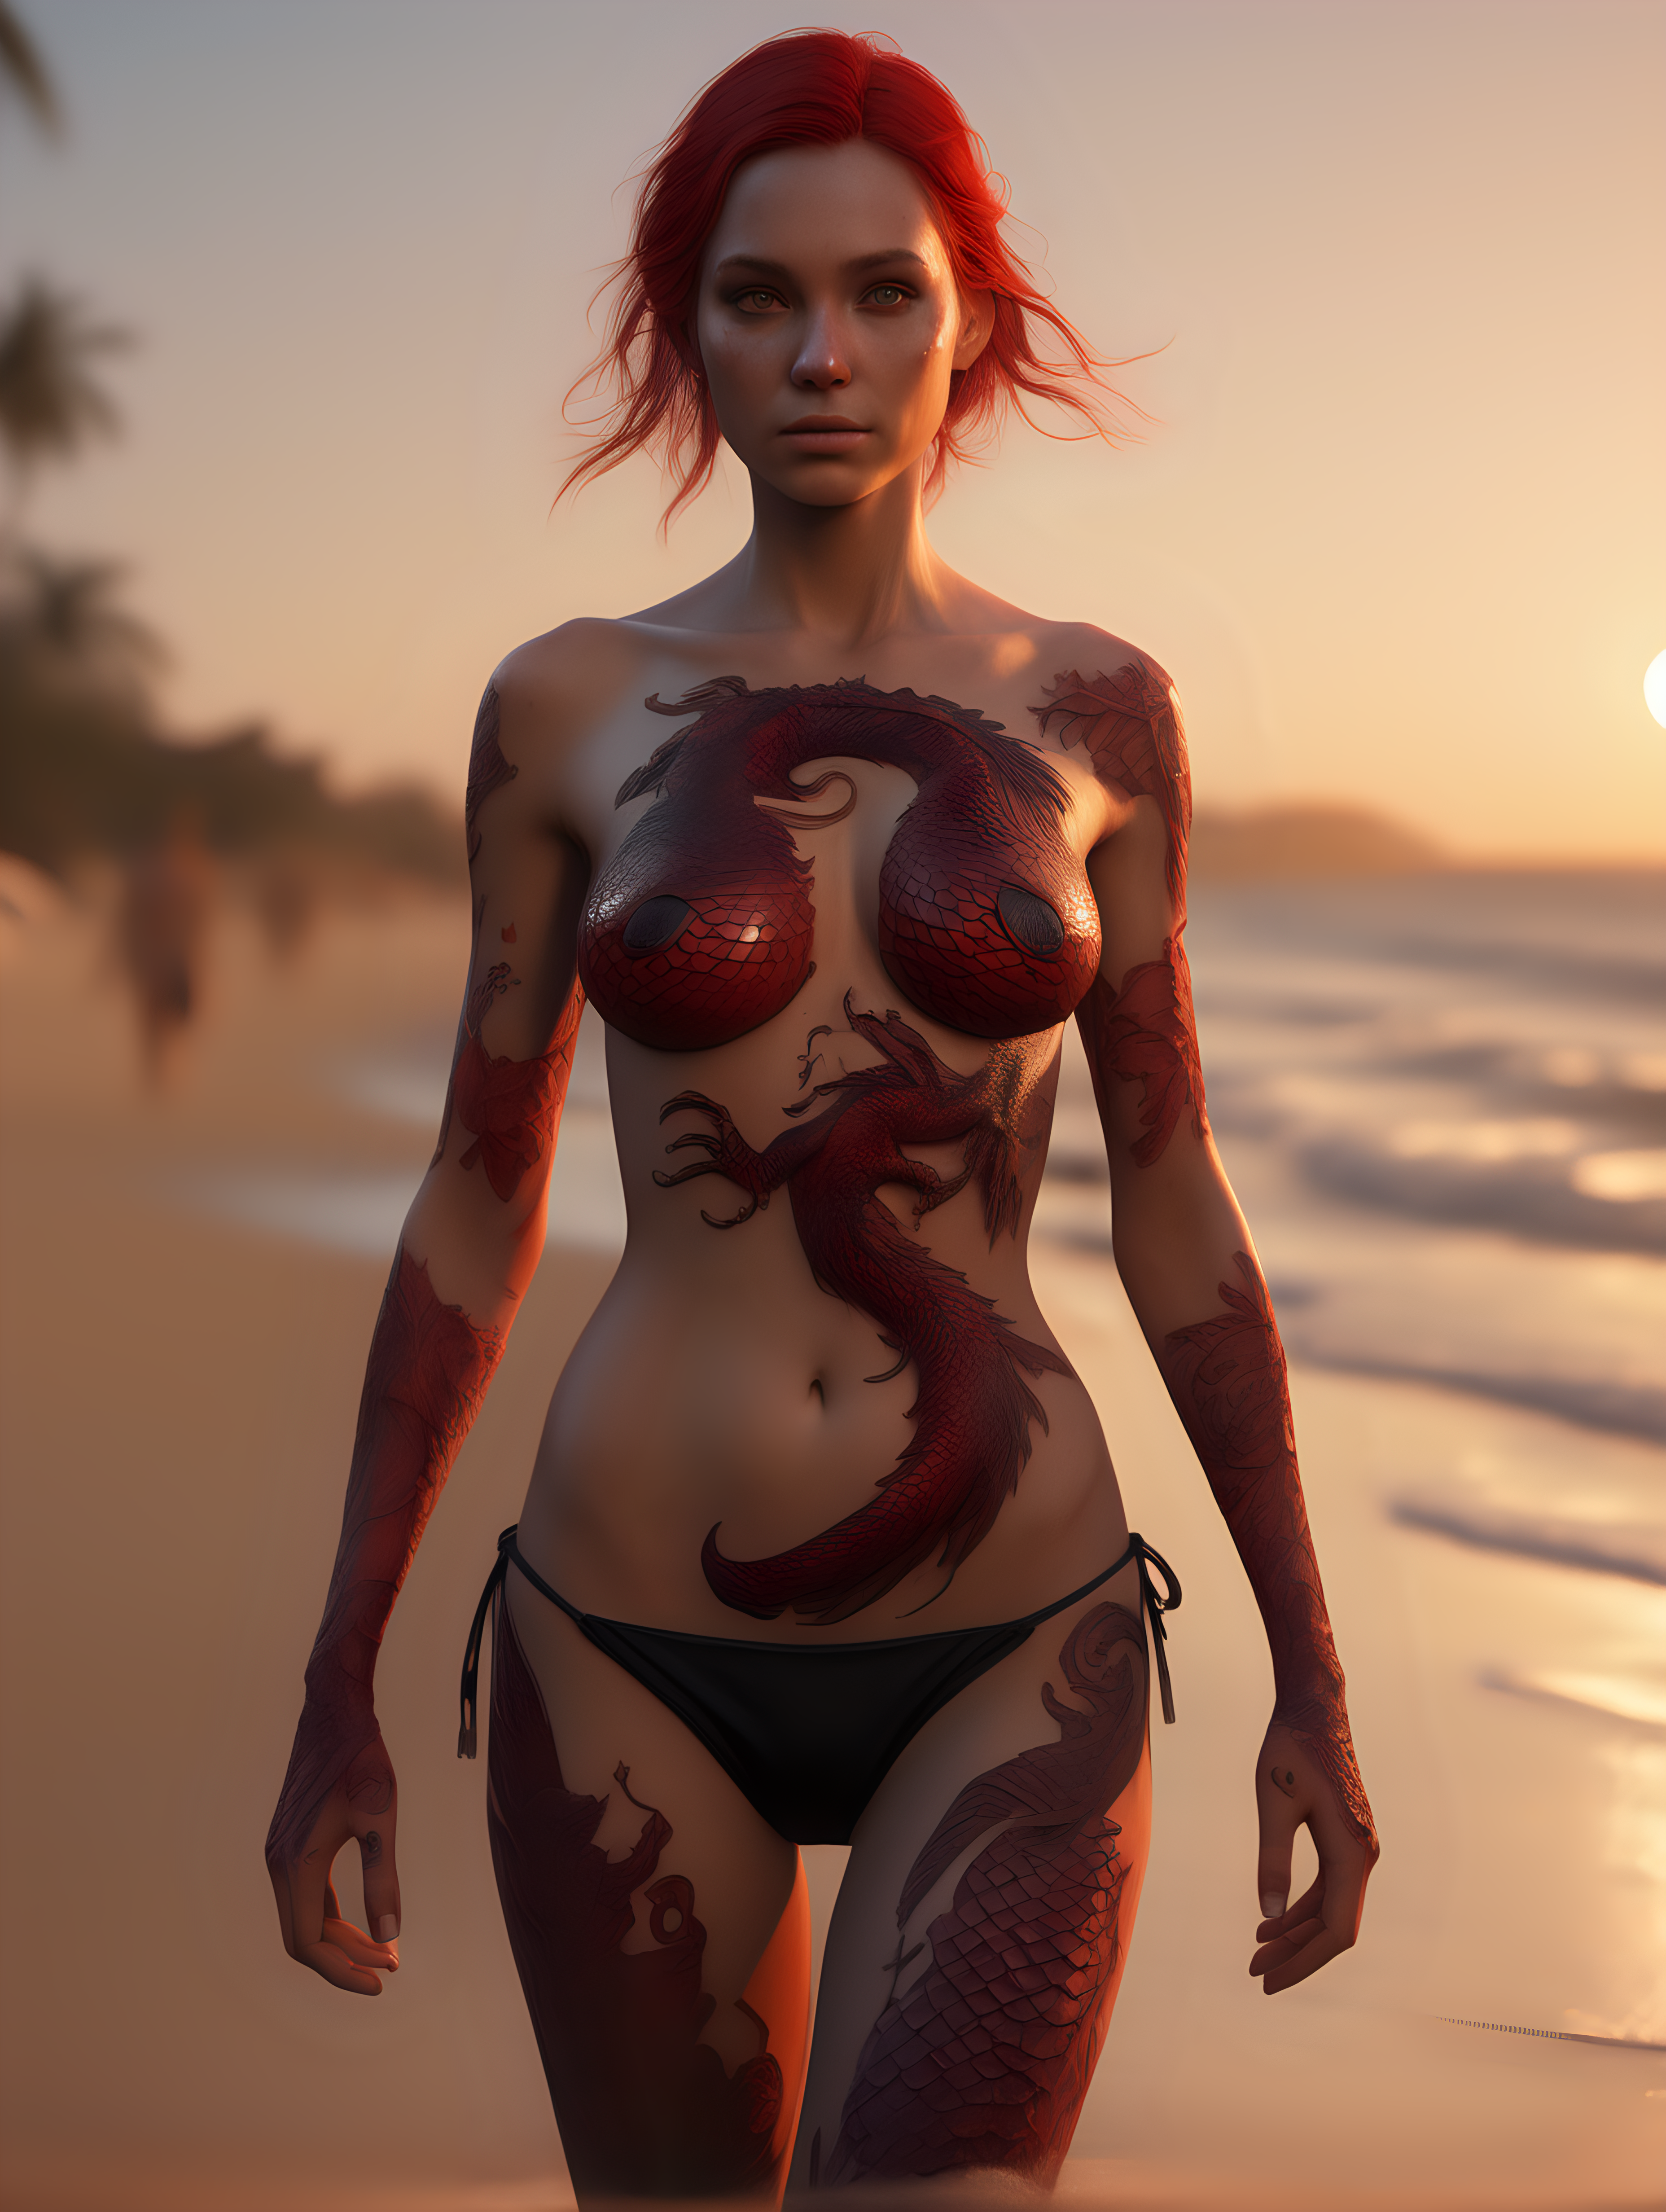 ultra-realistic high resolution and highly detailed photo of a female human, with red scales growing on her body, she has black draconic symbols carved into her arms and body, in the sunset walking on a beach facing the camera